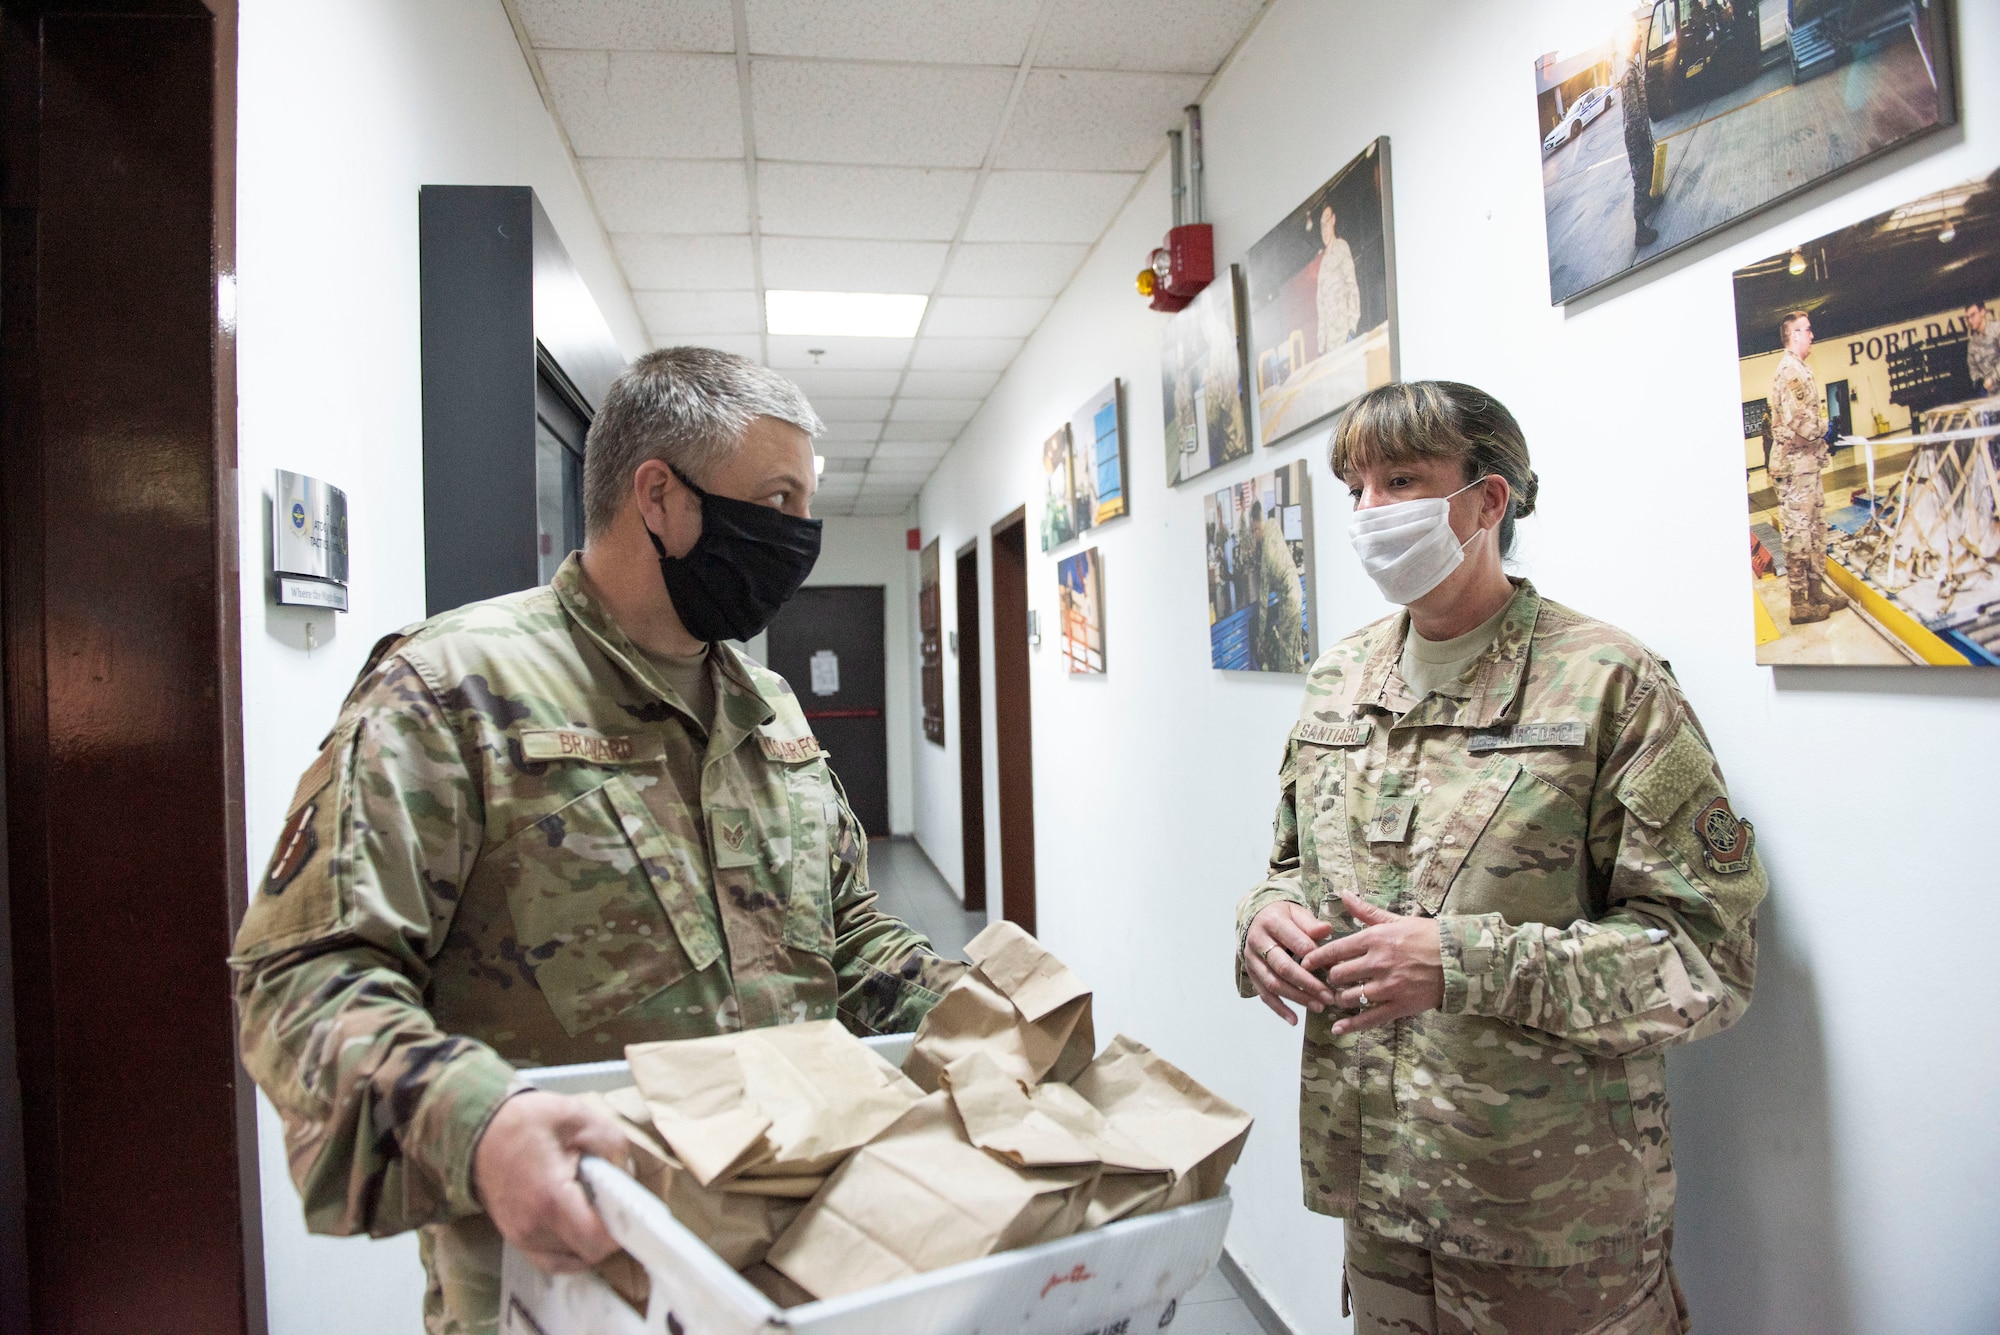 U.S. Air Force Staff Sgt. Jason Bravard, 39th Air Base Wing chapel non-commissioned officer in charge of resource management, (left), delivers care packages April 14, 2020, at Incirlik Air Base, Turkey. The chapel plays a key role in upholding the morale and spiritual well-being of troops, especially in times of crises. (U.S. Air Force photo by Staff Sgt. Joshua Magbanua)